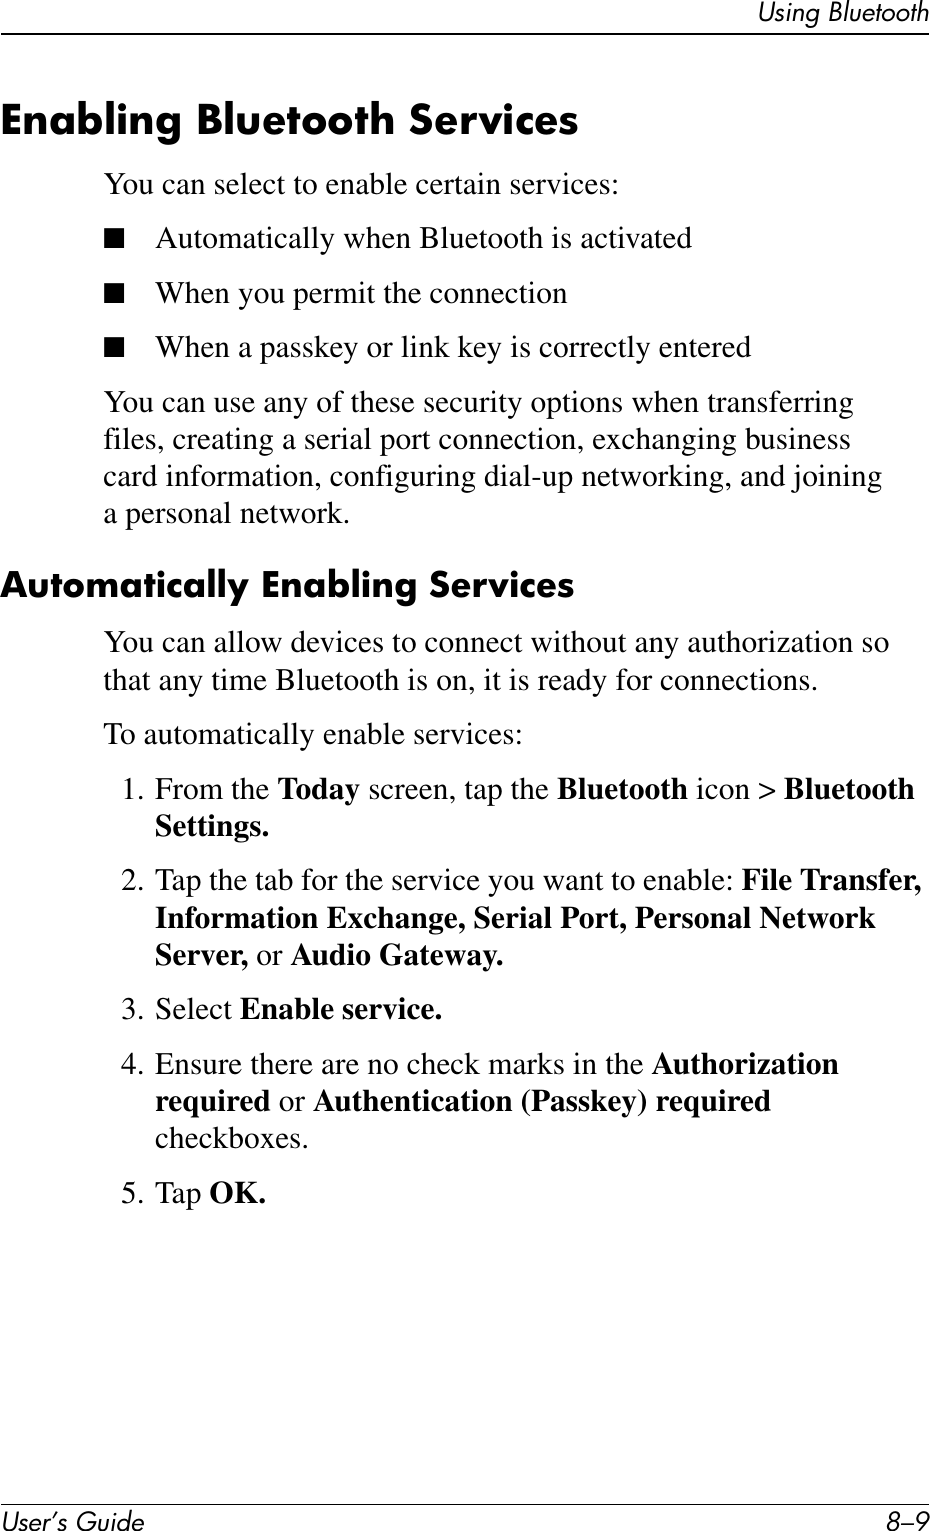 Using BluetoothUser’s Guide 8–9Enabling Bluetooth ServicesYou can select to enable certain services:■Automatically when Bluetooth is activated■When you permit the connection■When a passkey or link key is correctly enteredYou can use any of these security options when transferring files, creating a serial port connection, exchanging business card information, configuring dial-up networking, and joining a personal network.Automatically Enabling ServicesYou can allow devices to connect without any authorization so that any time Bluetooth is on, it is ready for connections.To automatically enable services:1. From the Today screen, tap the Bluetooth icon &gt; Bluetooth Settings.2. Tap the tab for the service you want to enable: File Transfer, Information Exchange, Serial Port, Personal Network Server, or Audio Gateway.3. Select Enable service. 4. Ensure there are no check marks in the Authorization required or Authentication (Passkey) required checkboxes.5. Tap OK.